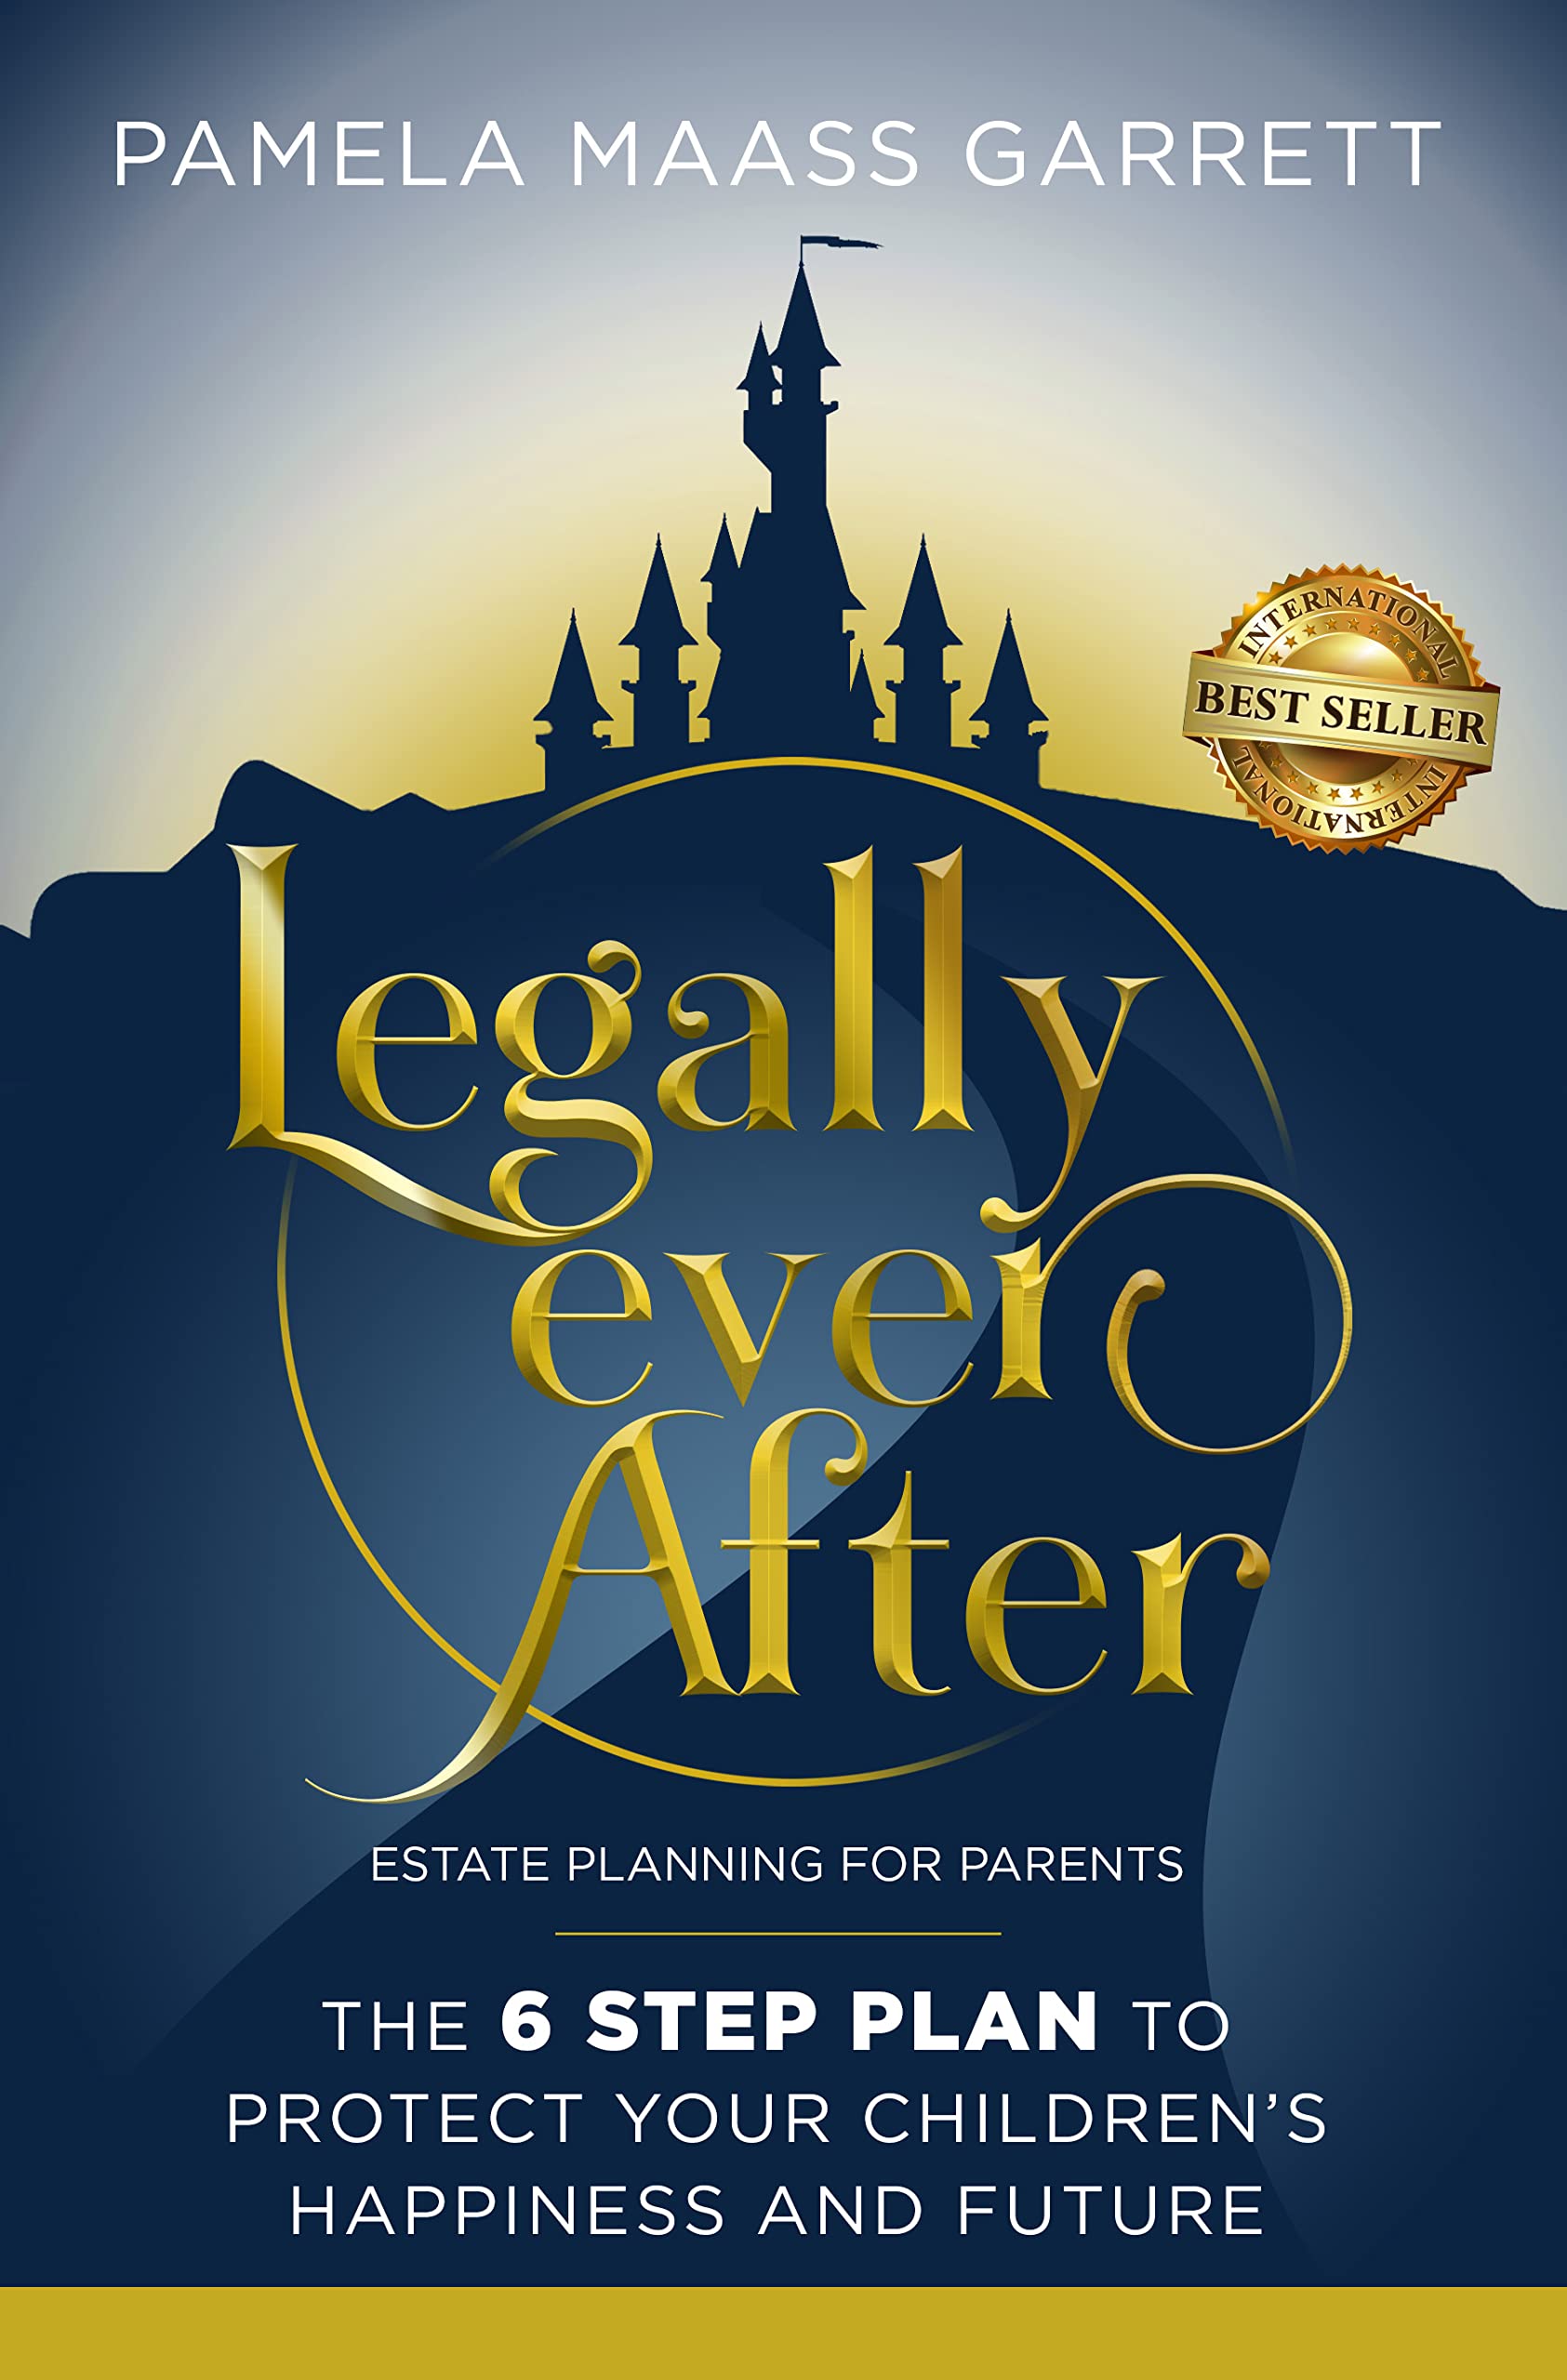 Legally Ever After: Estate Planning for Parents, the 6-Step Plan to Protect Your Children's Happiness and Future